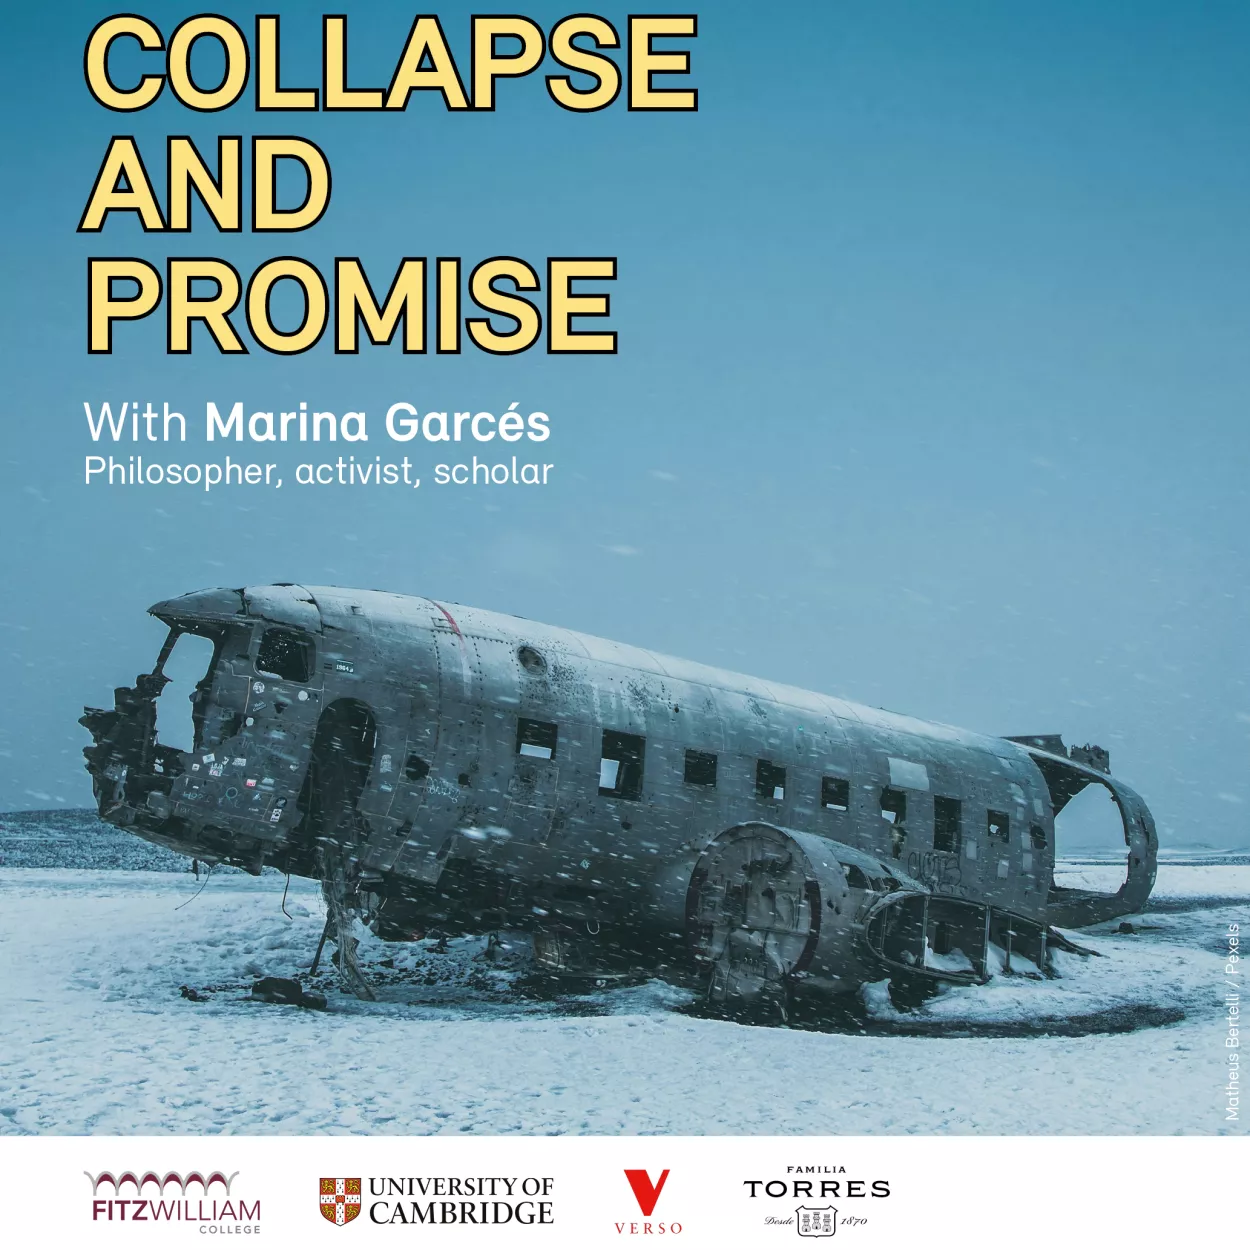 Poster for Gerhard Lecture - a shell of a plane against a snowy background